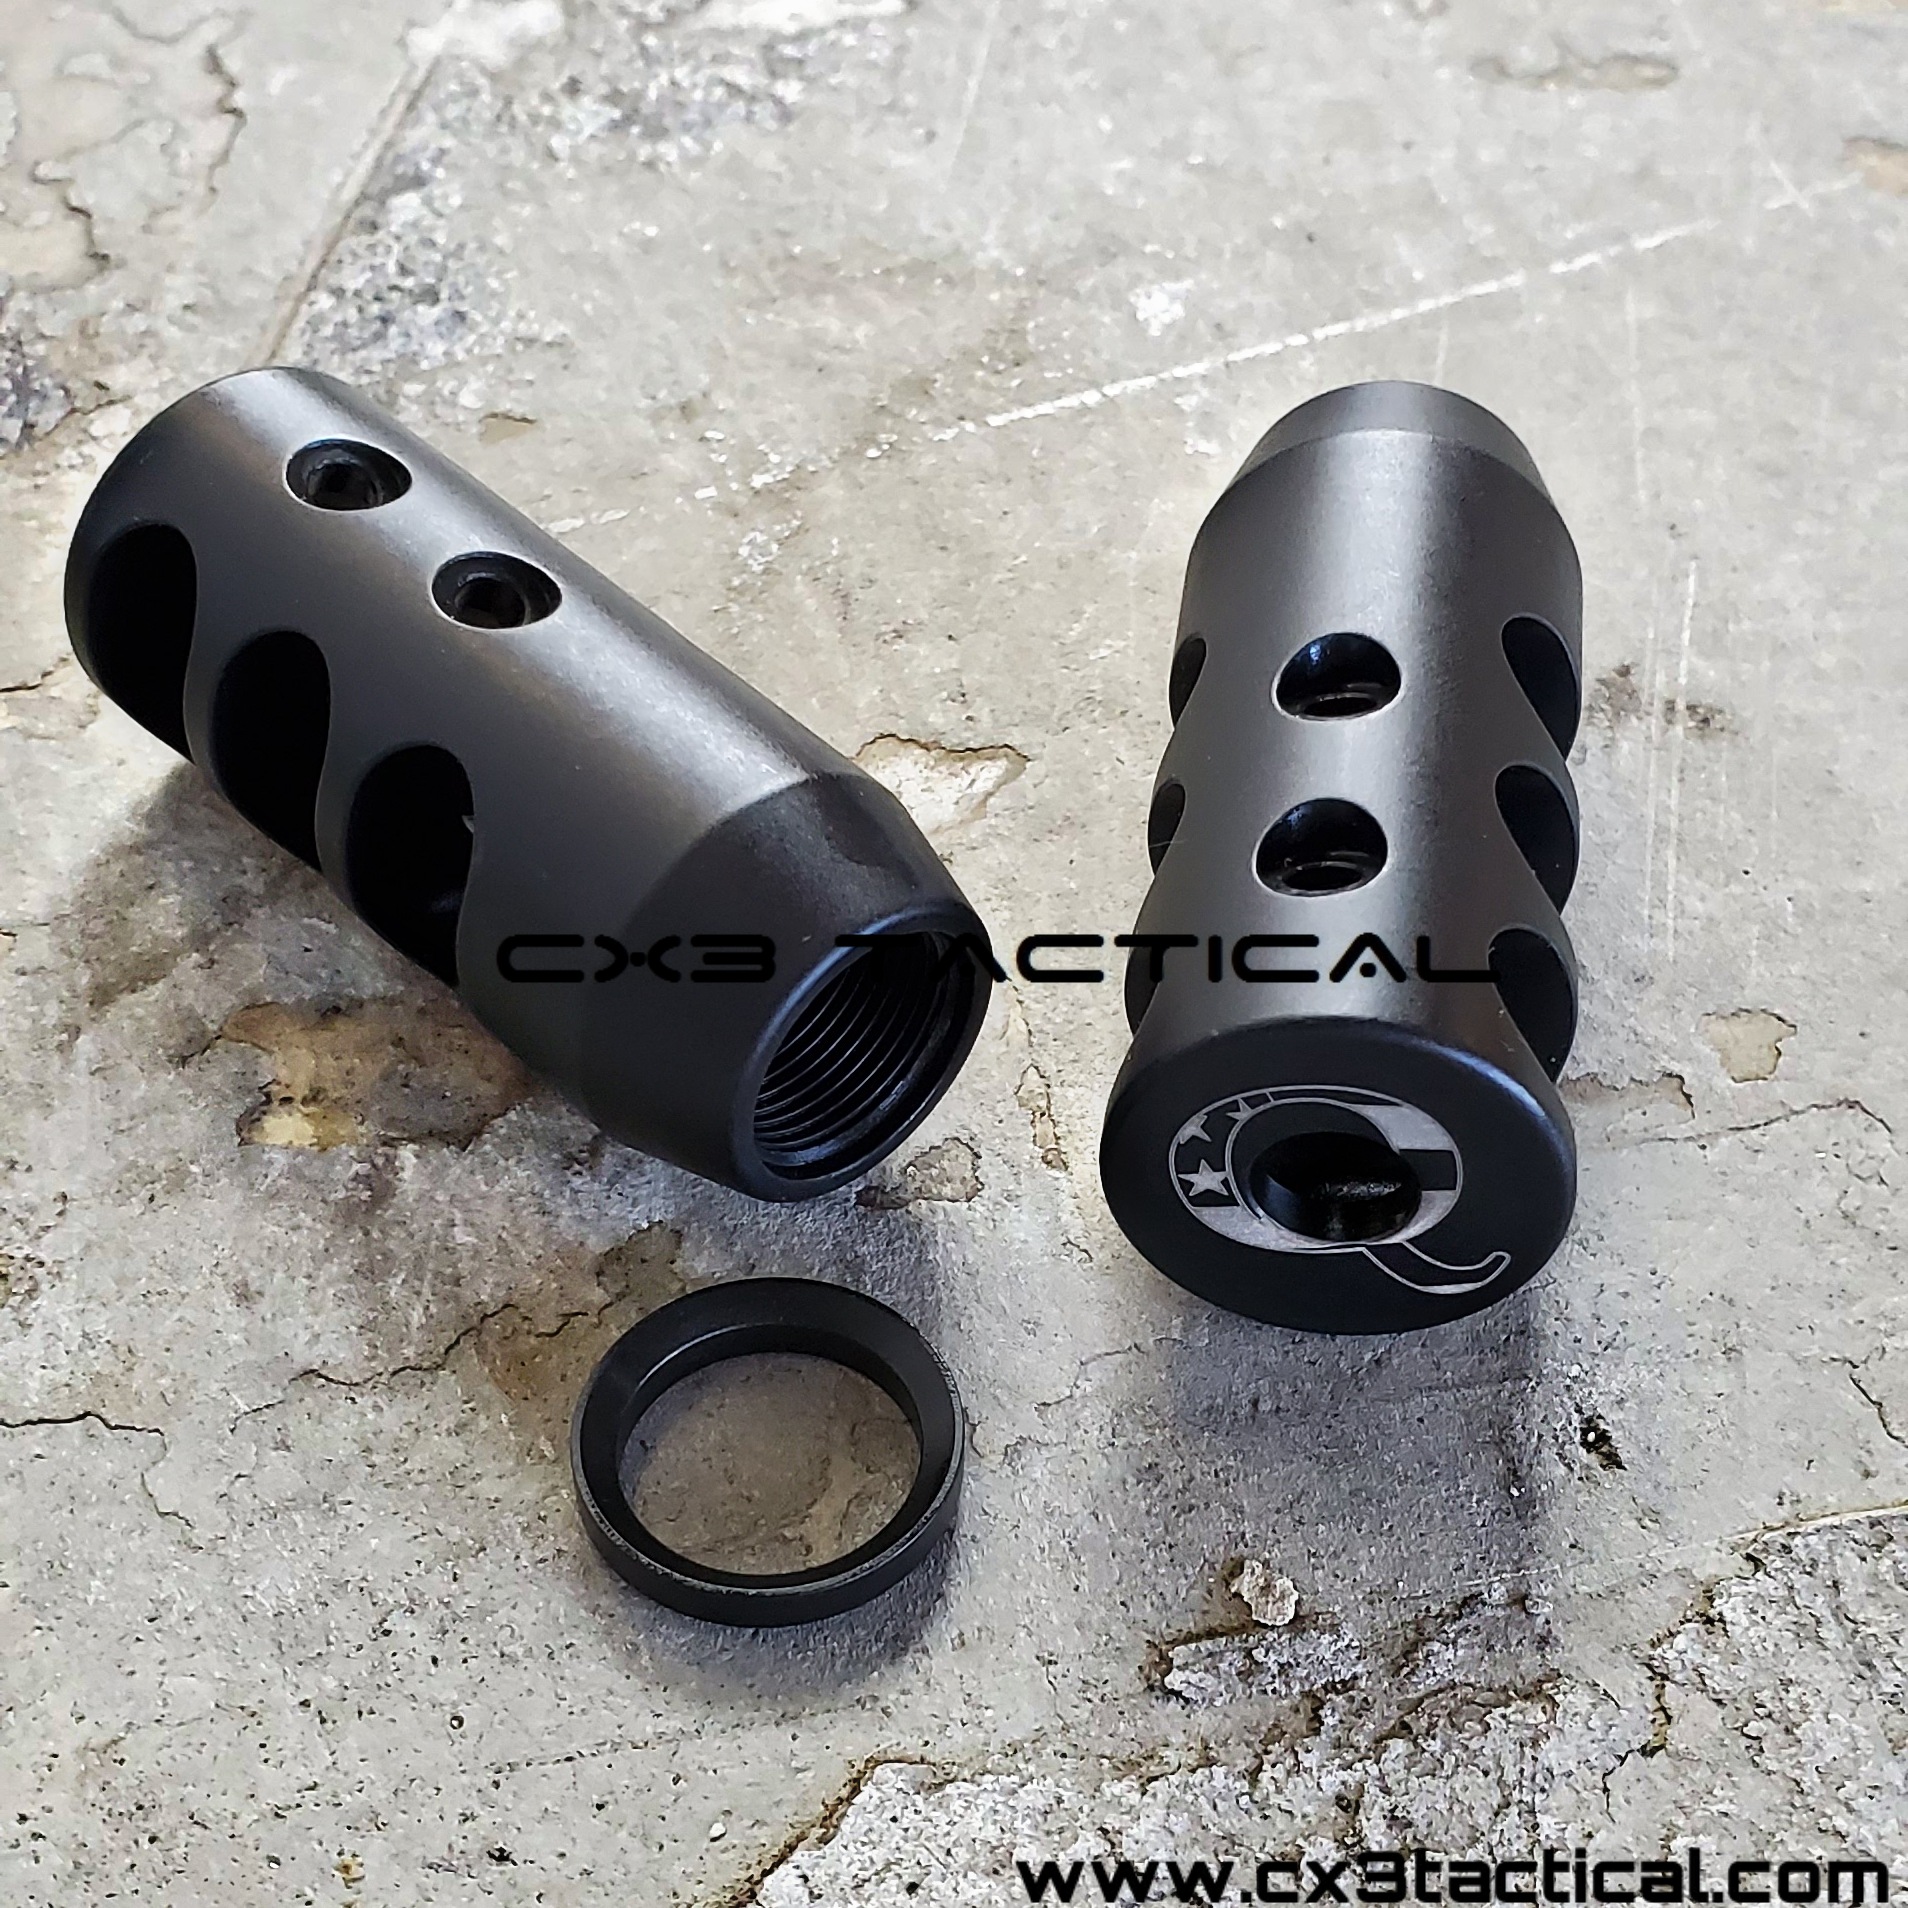 .308 Stainless Steel Compensator Muzzle Brake Comp 7.62x51 Crush Washer 5/8-24 